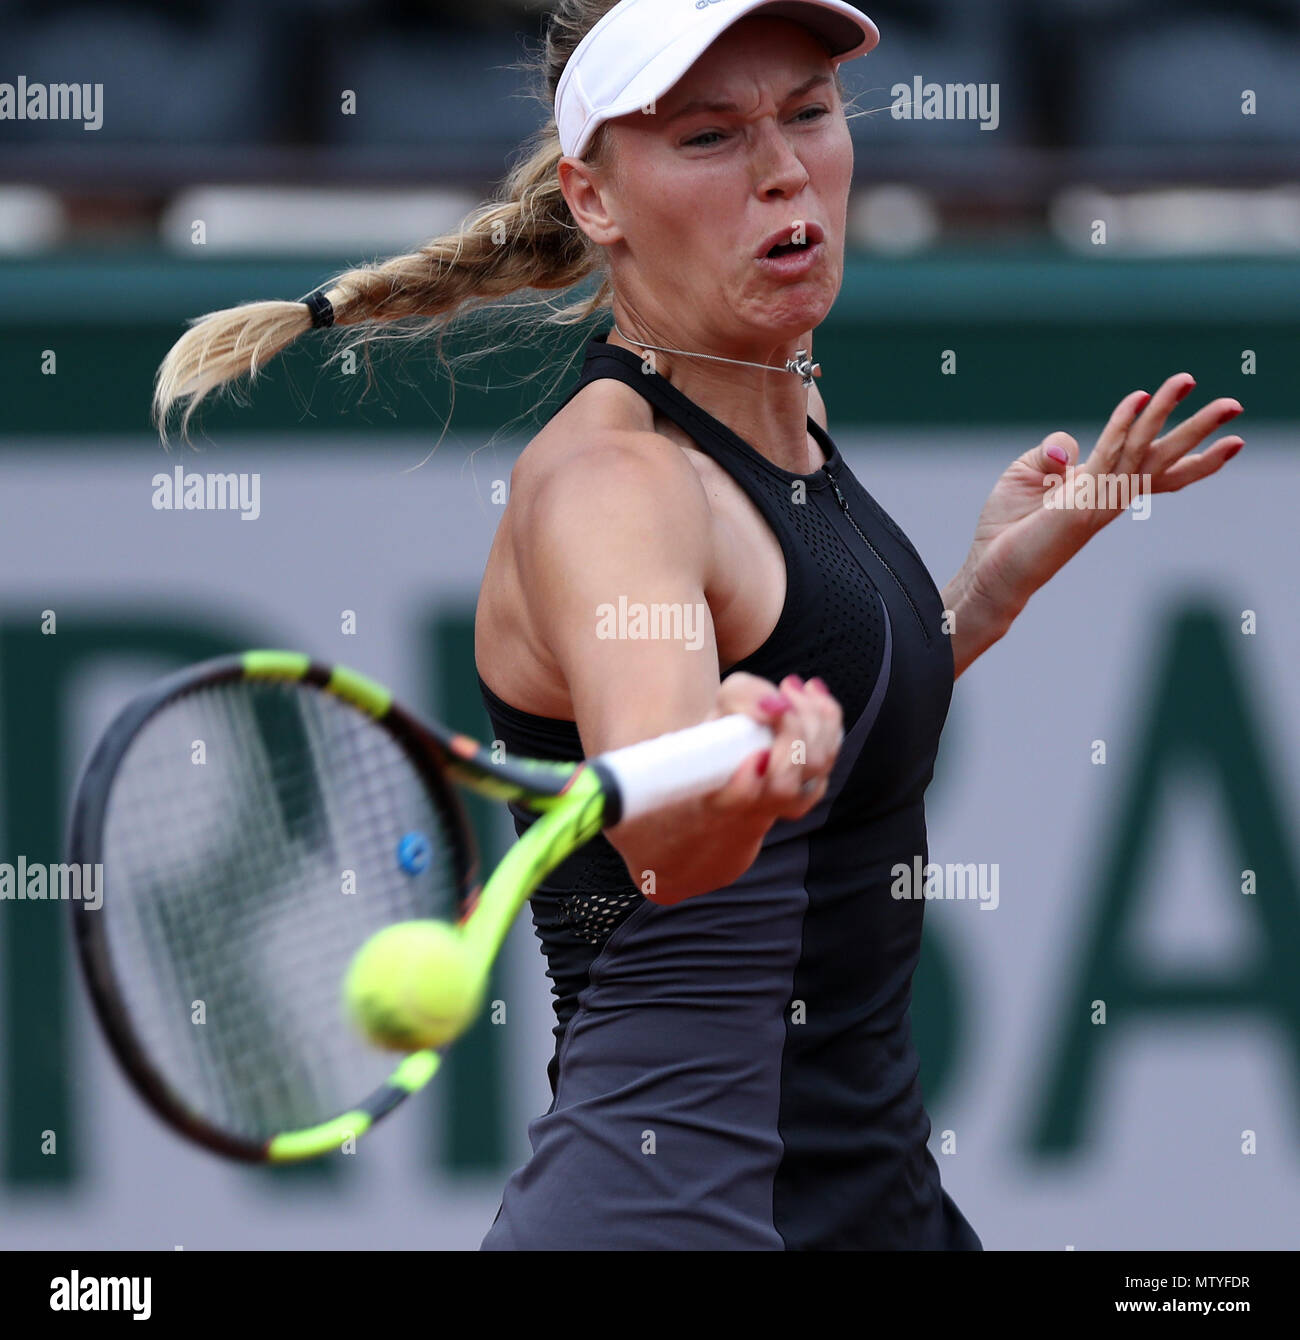 Paris. 30th May, 2018. Caroline Wozniacki of Denmark returns a shot during  the women's singles second round match against Georgina Garcia Perez of  Spain at the French Open Tennis Tournament 2018 in